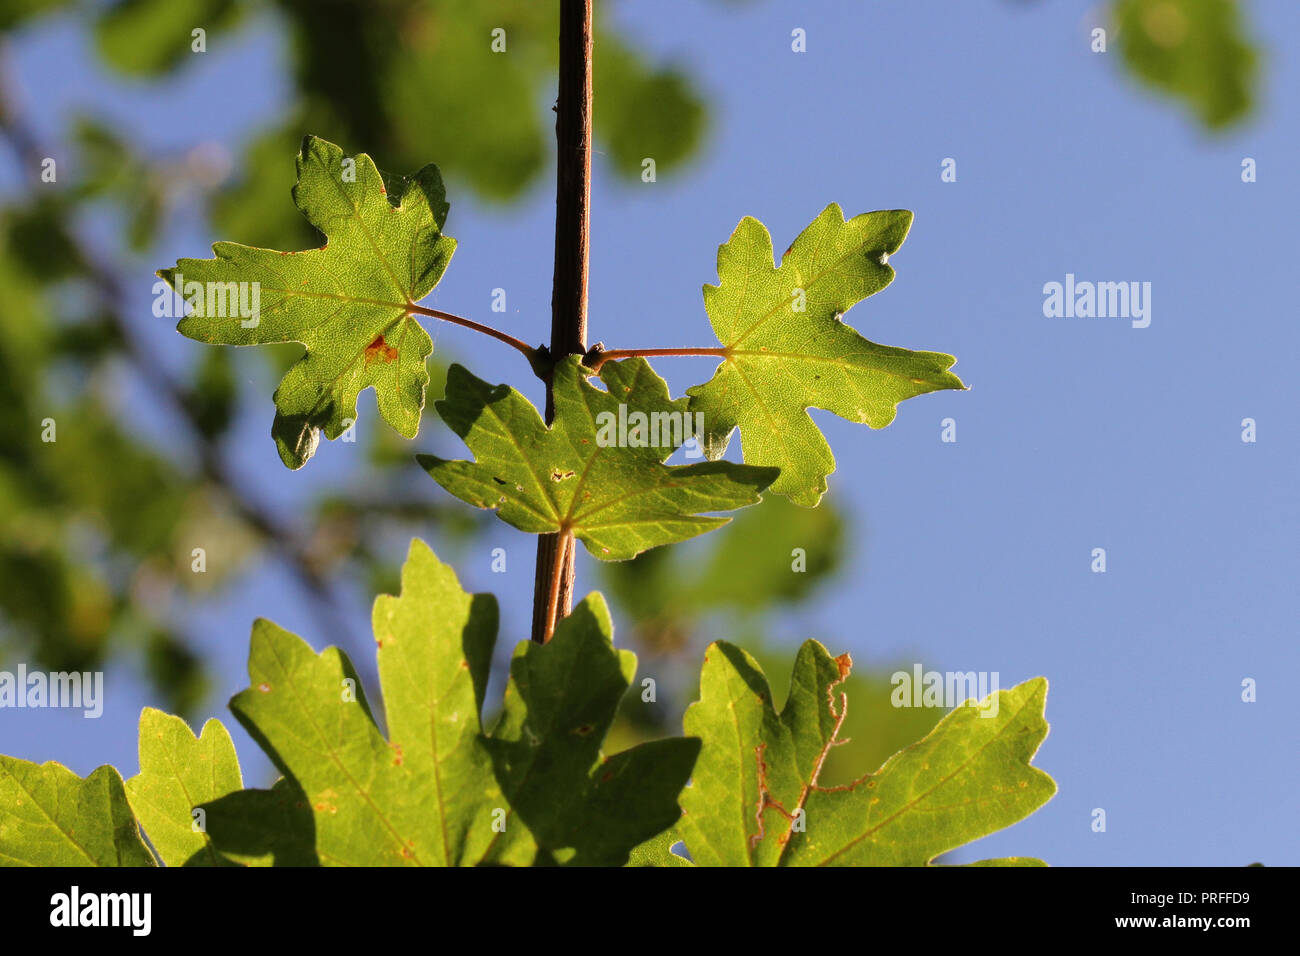 maple or sycamore leaves with the sun behind in early autumn or fall in Italy Latin acer opalus or acer pseudoplatanus from and Italin maple Stock Photo